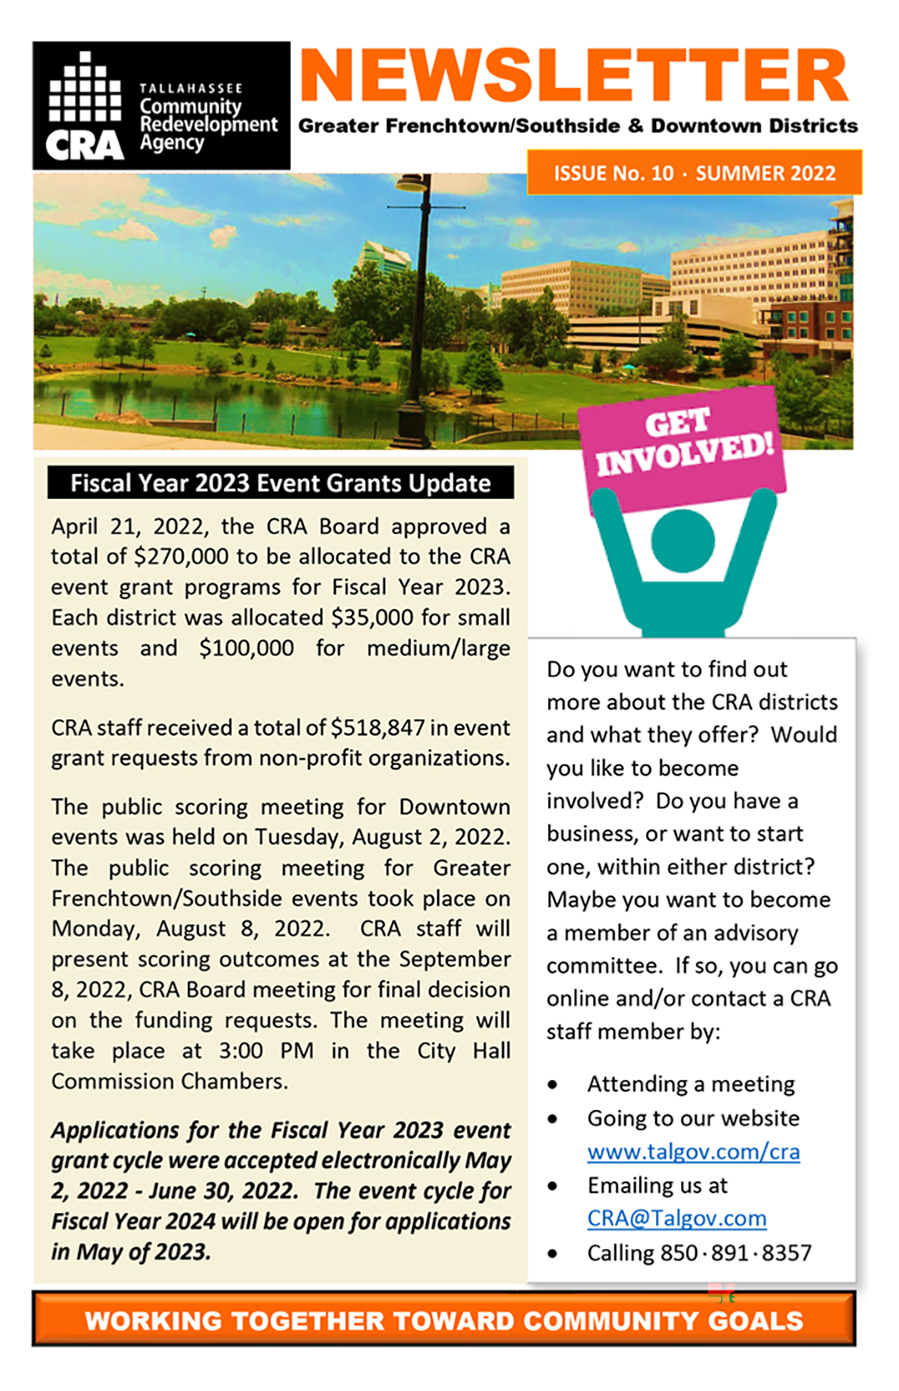 an image of the newsletter